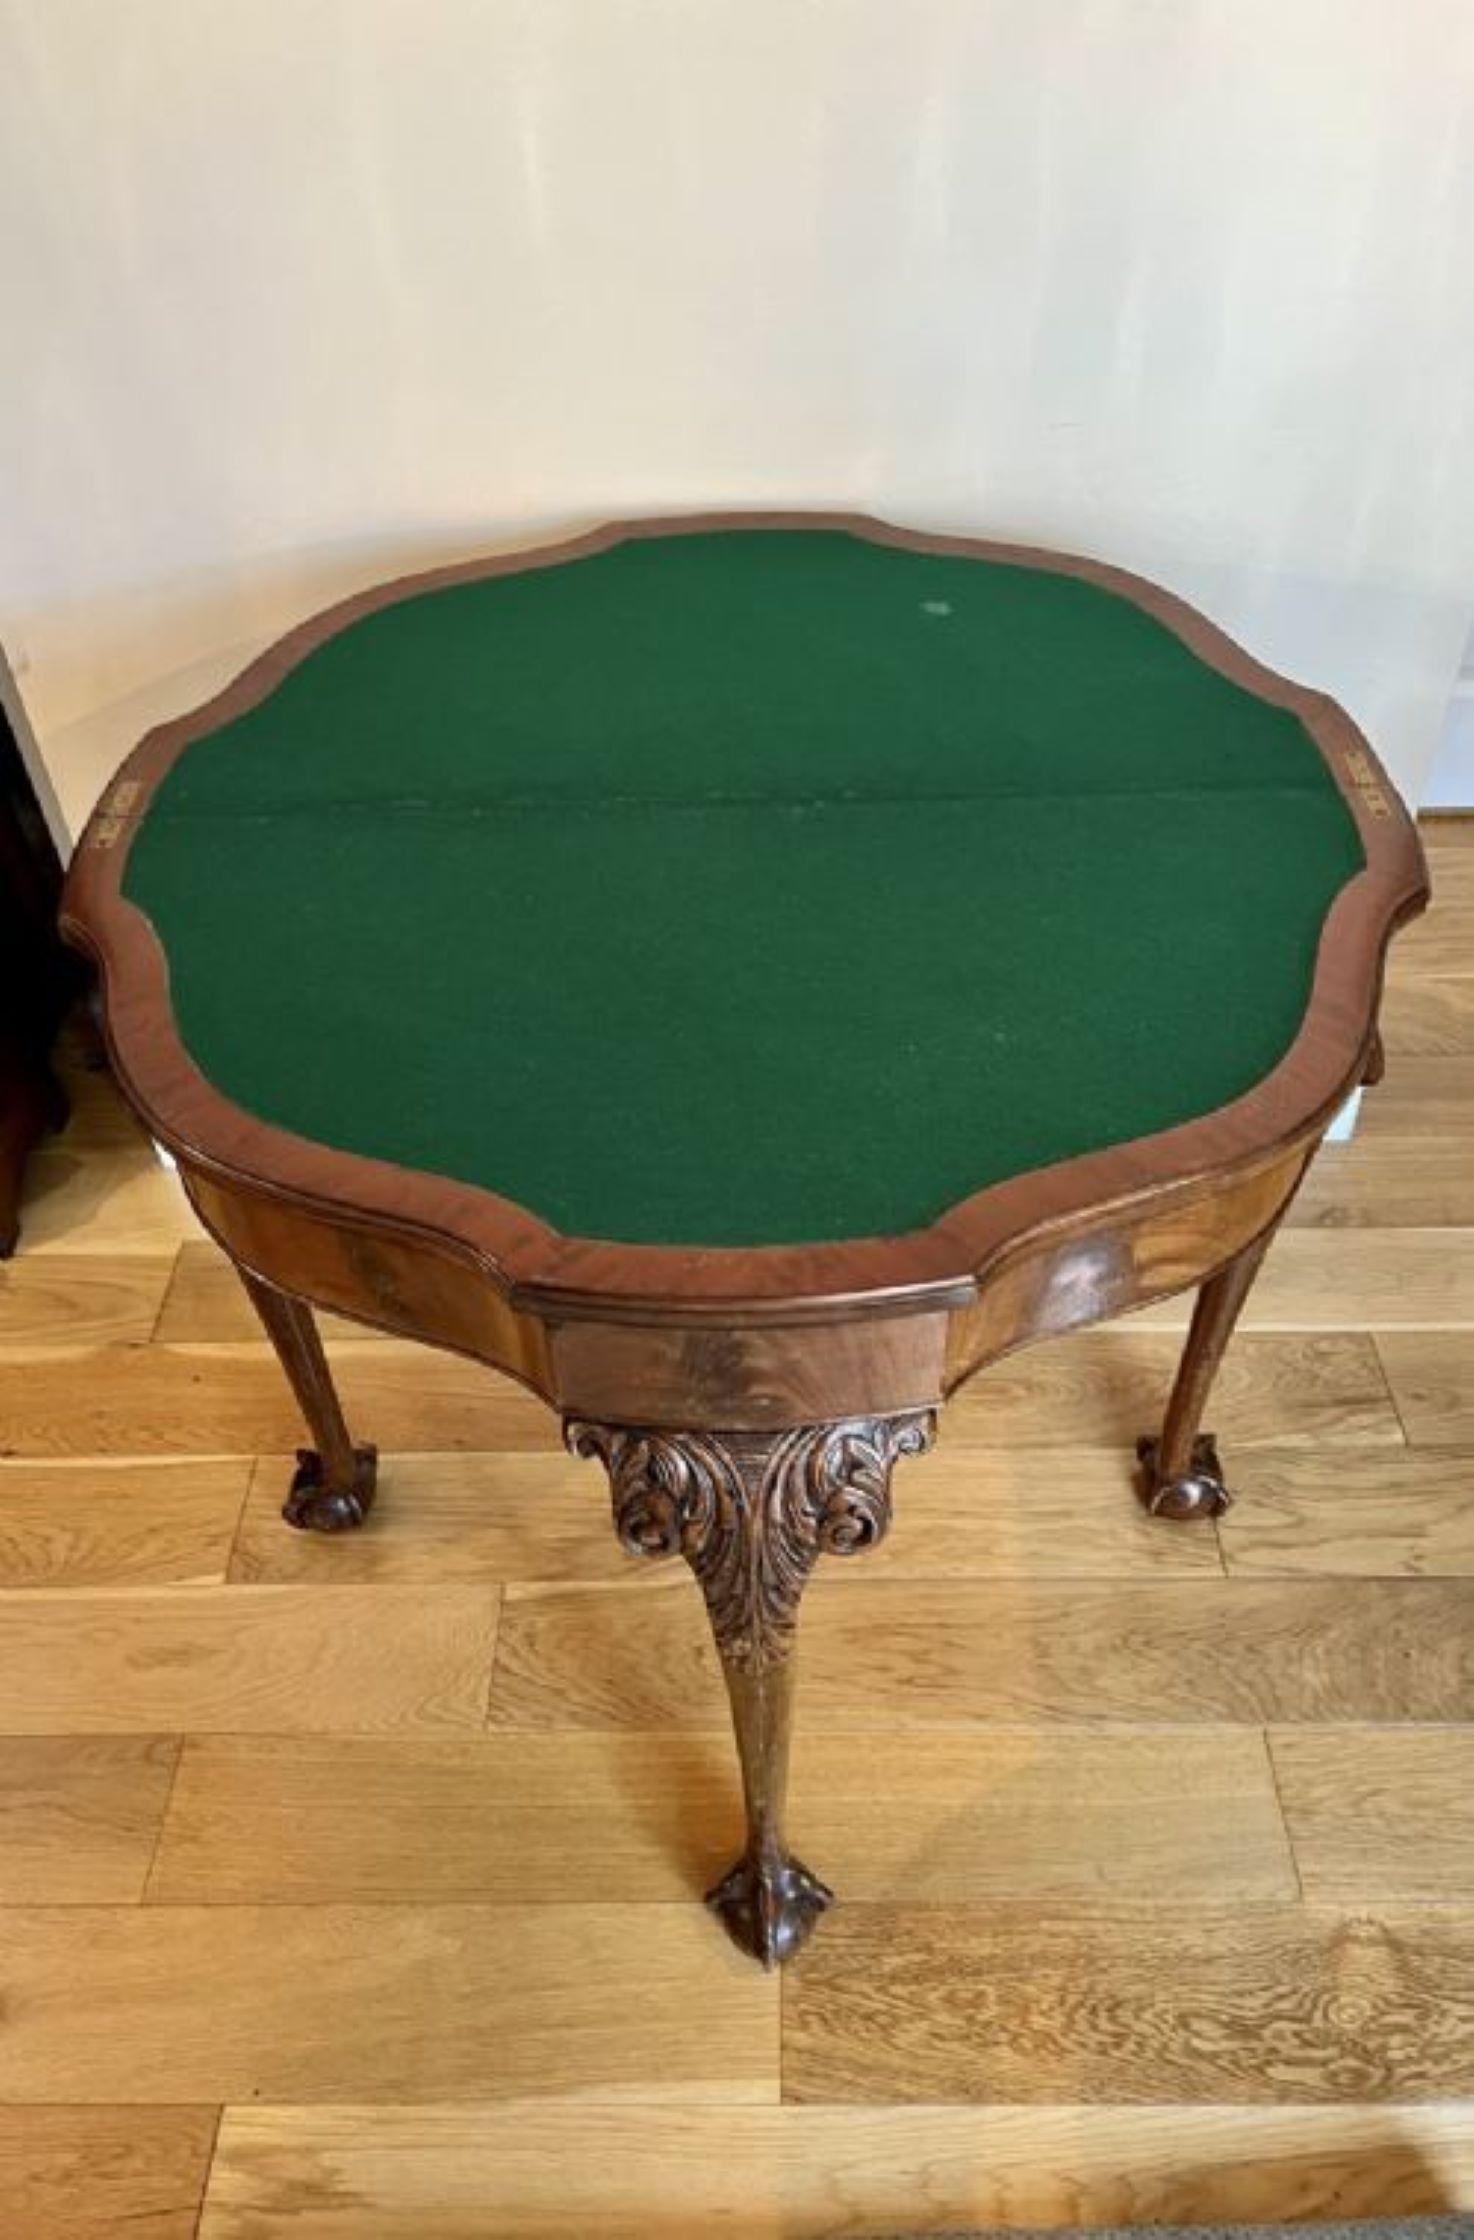 Antique Quality figured walnut card table (maple & co) having a quality serpentine shaped figured walnut top with a superb carved edge opening to reveal a baize interior. Figured walnut frieze standing on fantastic carved cabriole legs with claw and